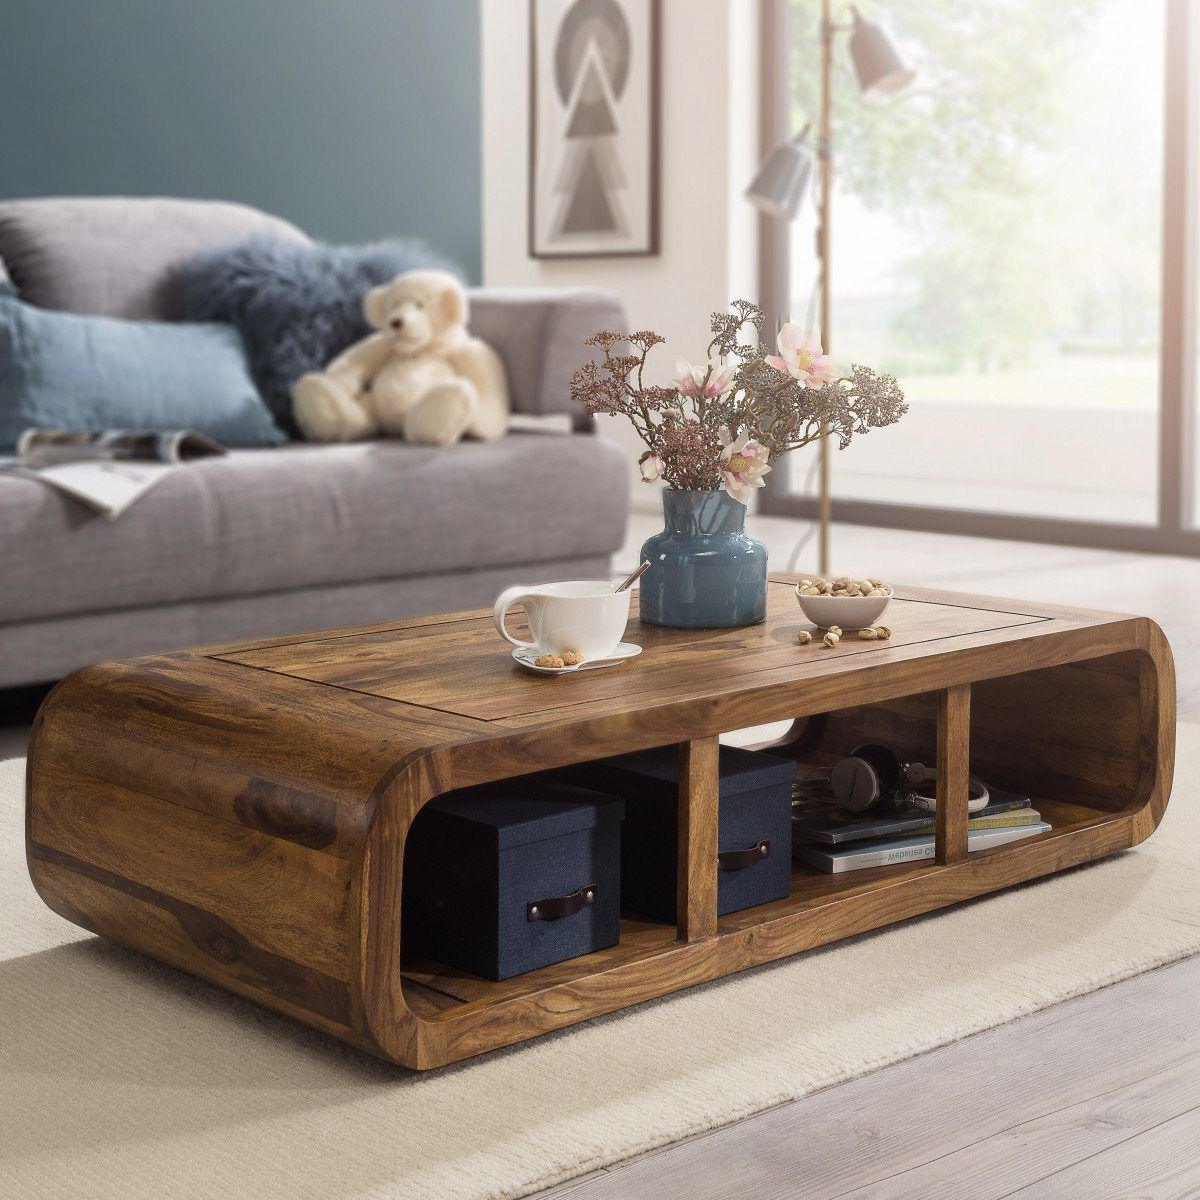 Buy Solid Wood Curved Coffee Table Online | New Launches Coffee Table Throughout Coffee Tables With Solid Legs (Gallery 18 of 20)